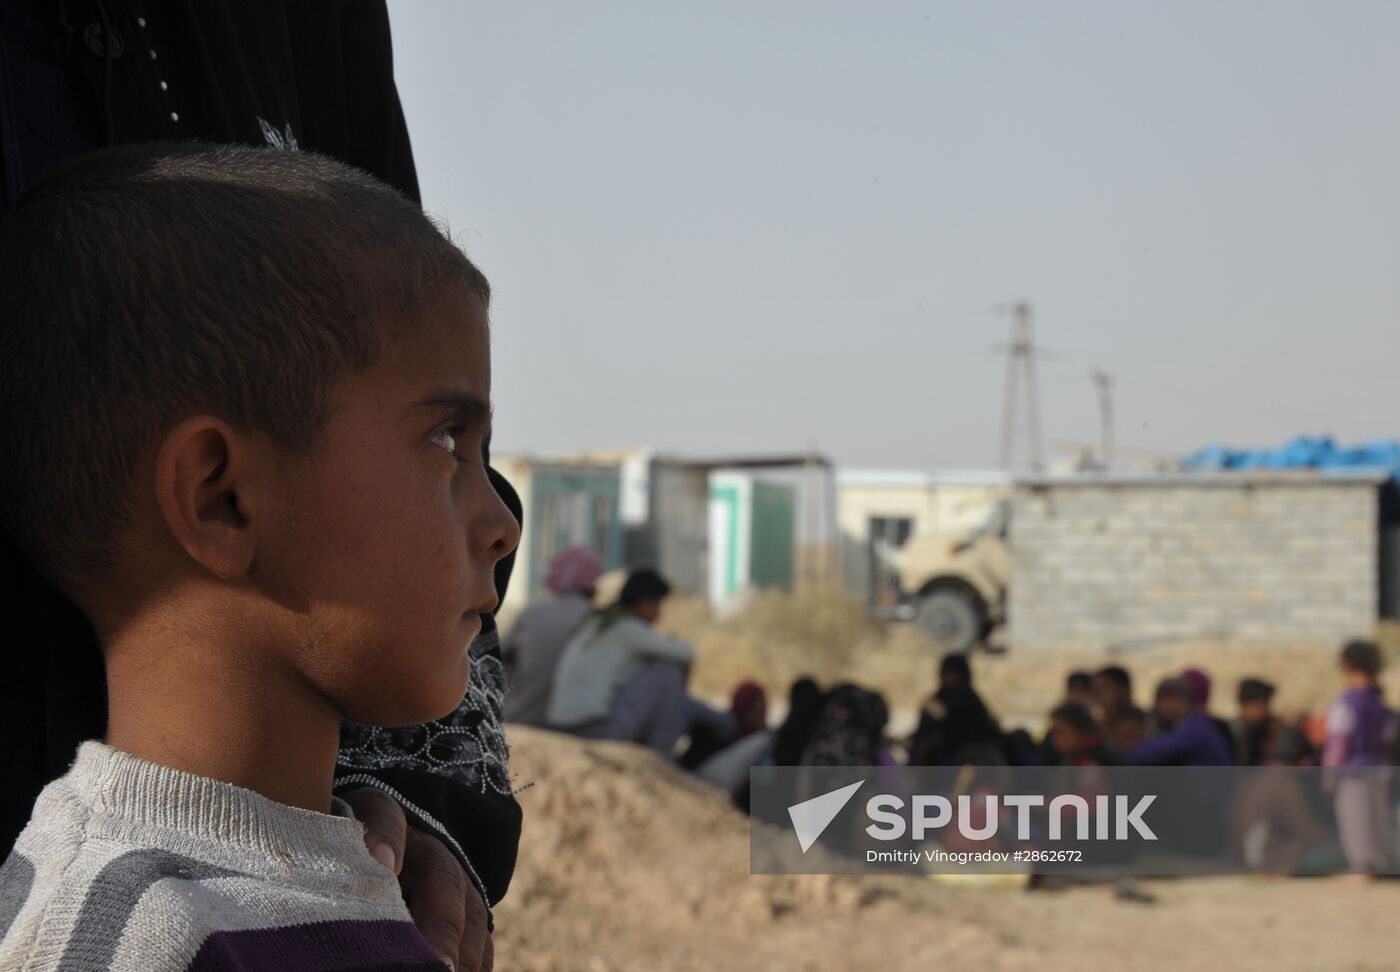 Refugees from ISIL-occupied lands come to Kirkuk in Iraq